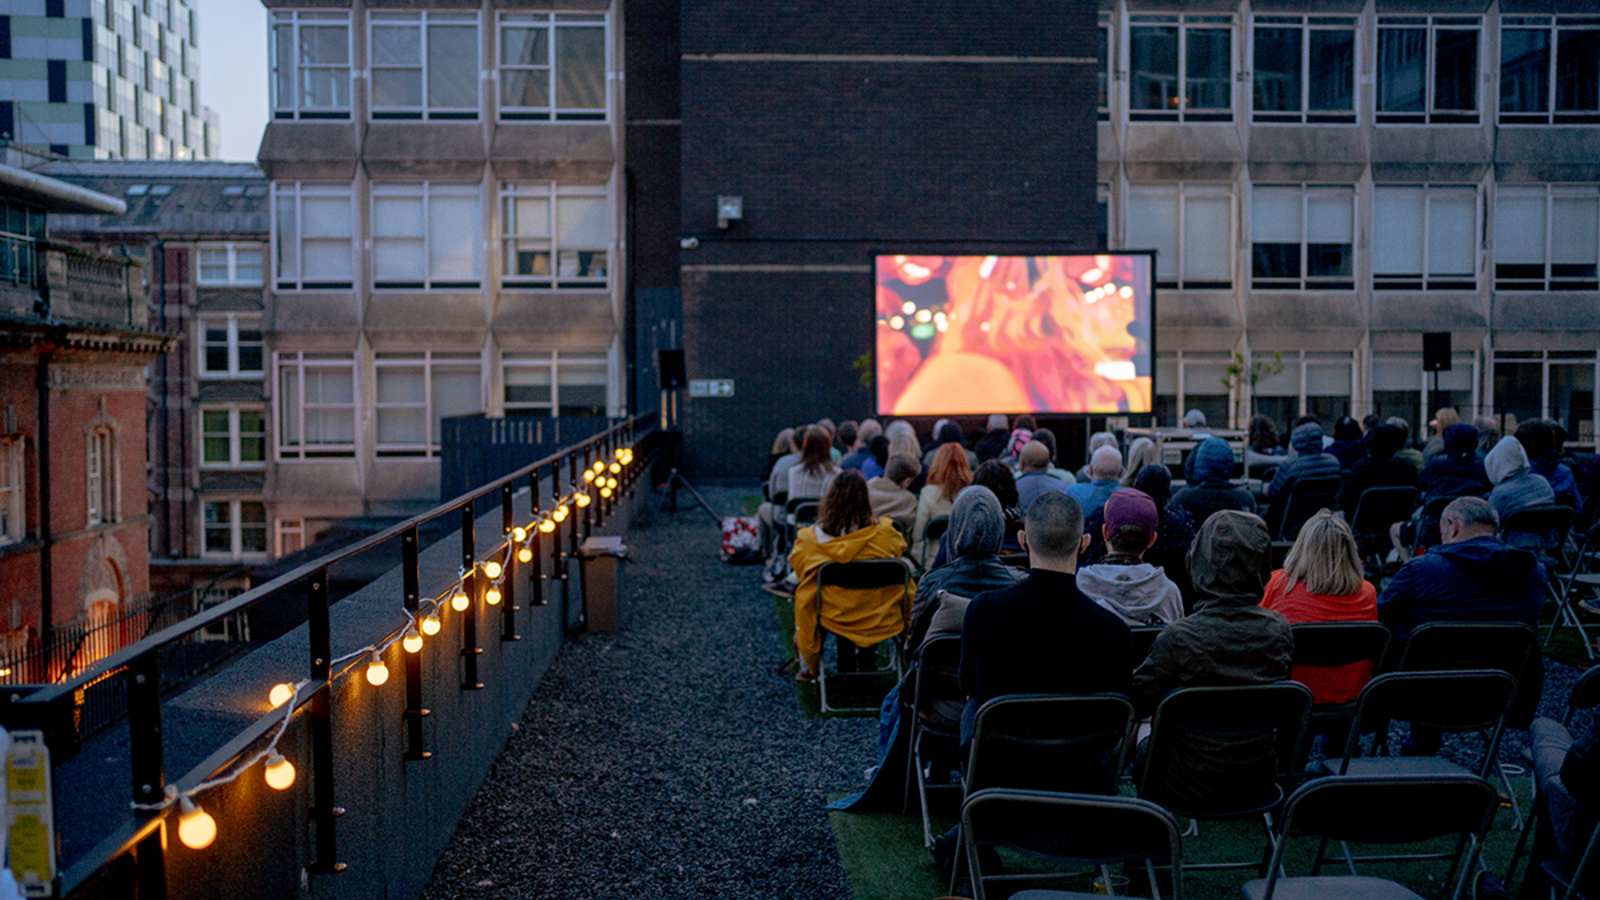 A group of people sat on a rooftop watching a film on a large screen